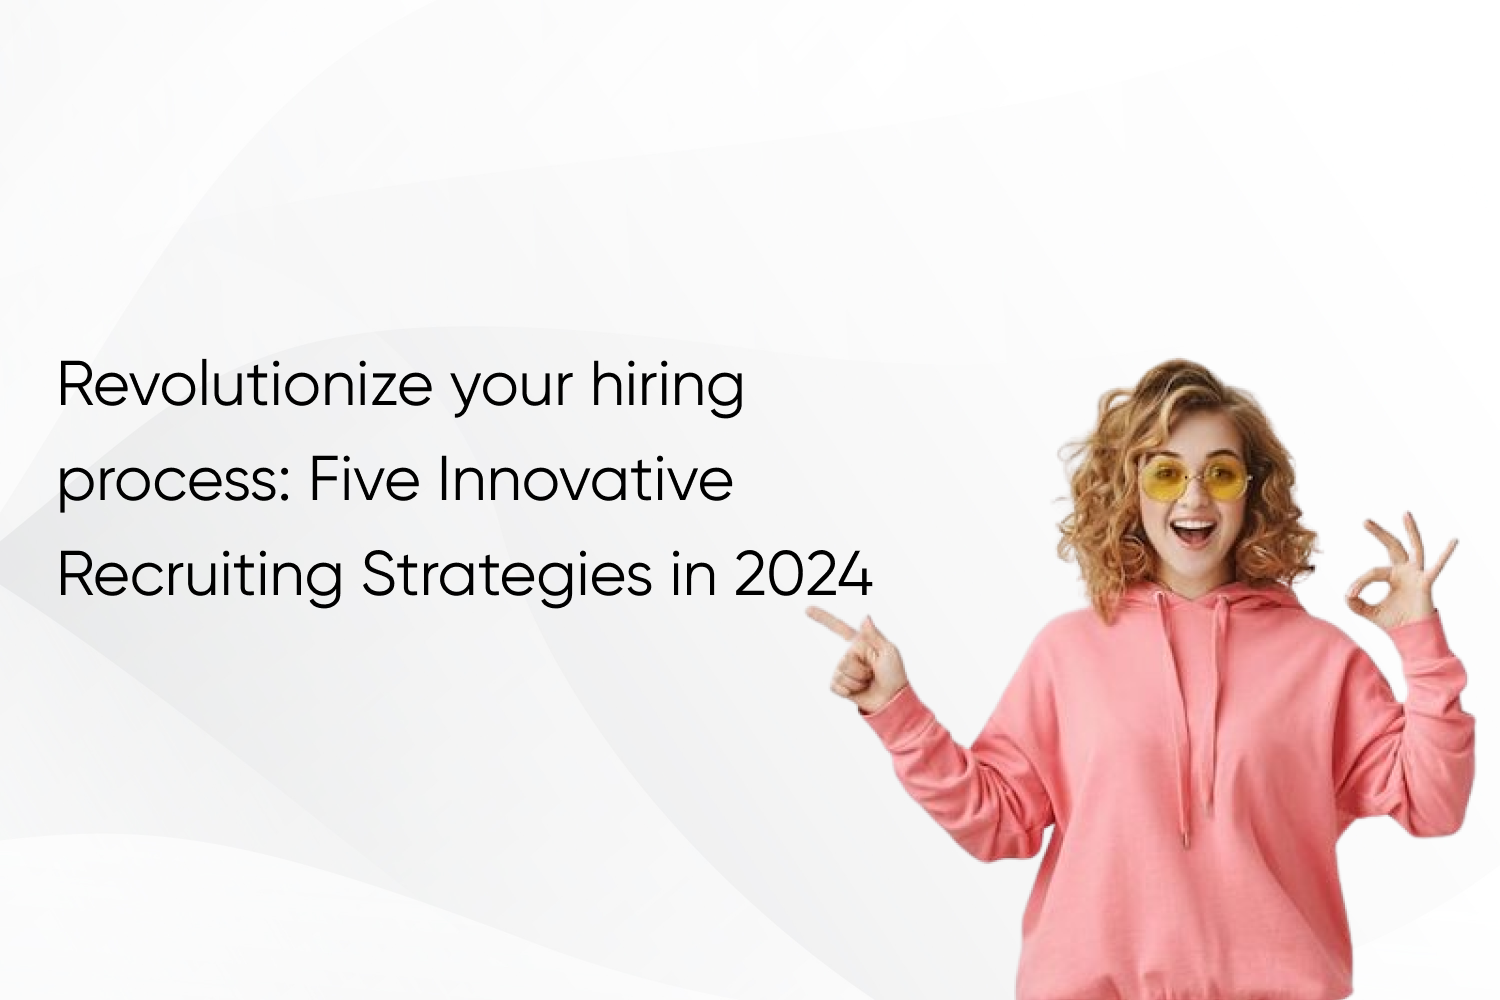 Revolutionize your hiring process: Five Innovative Recruiting Strategies in 2024